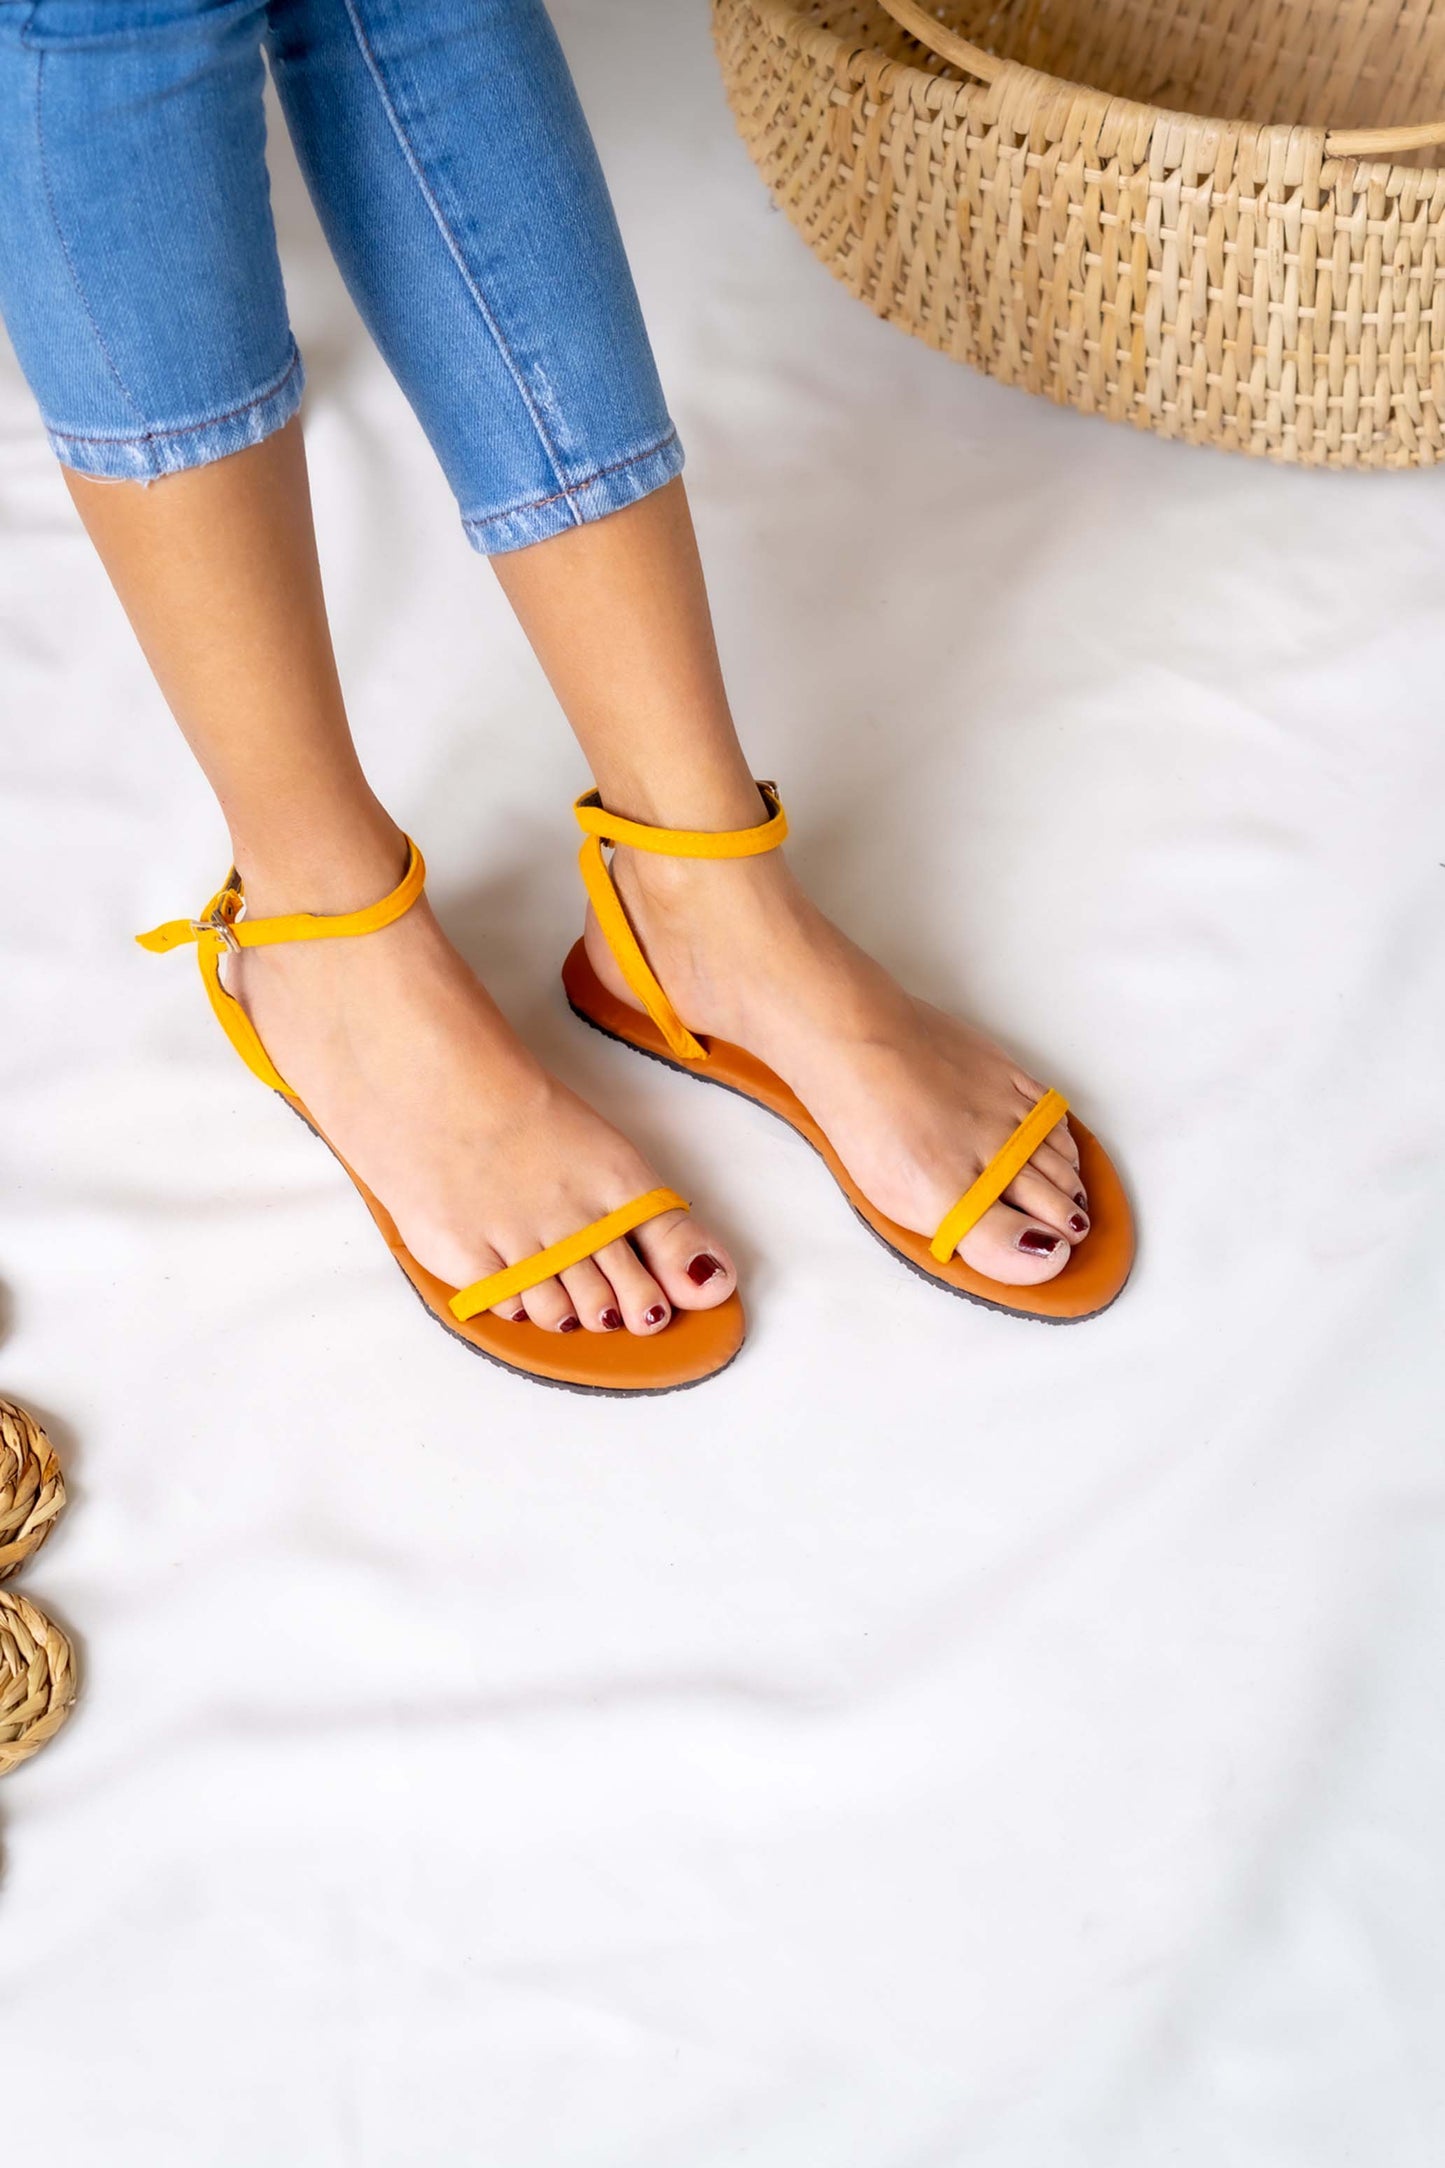 Sunny and stylish, this ladies' yellow flat sandal brings a pop of color to any outfit